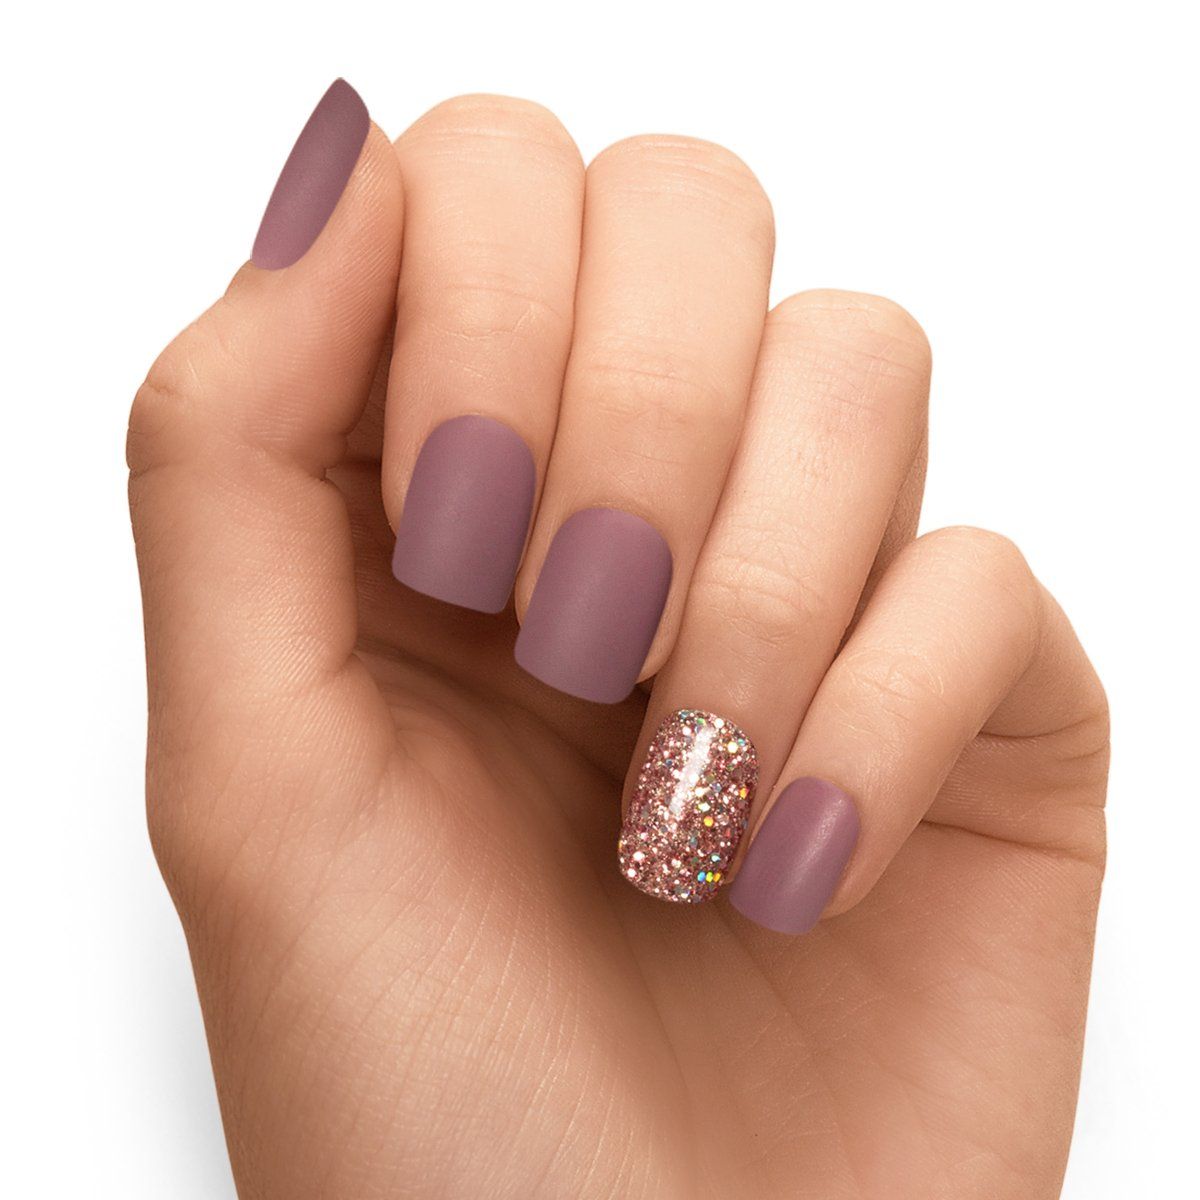 Muted Mauve 70+ Most Popular Gel Nail Colors - 9